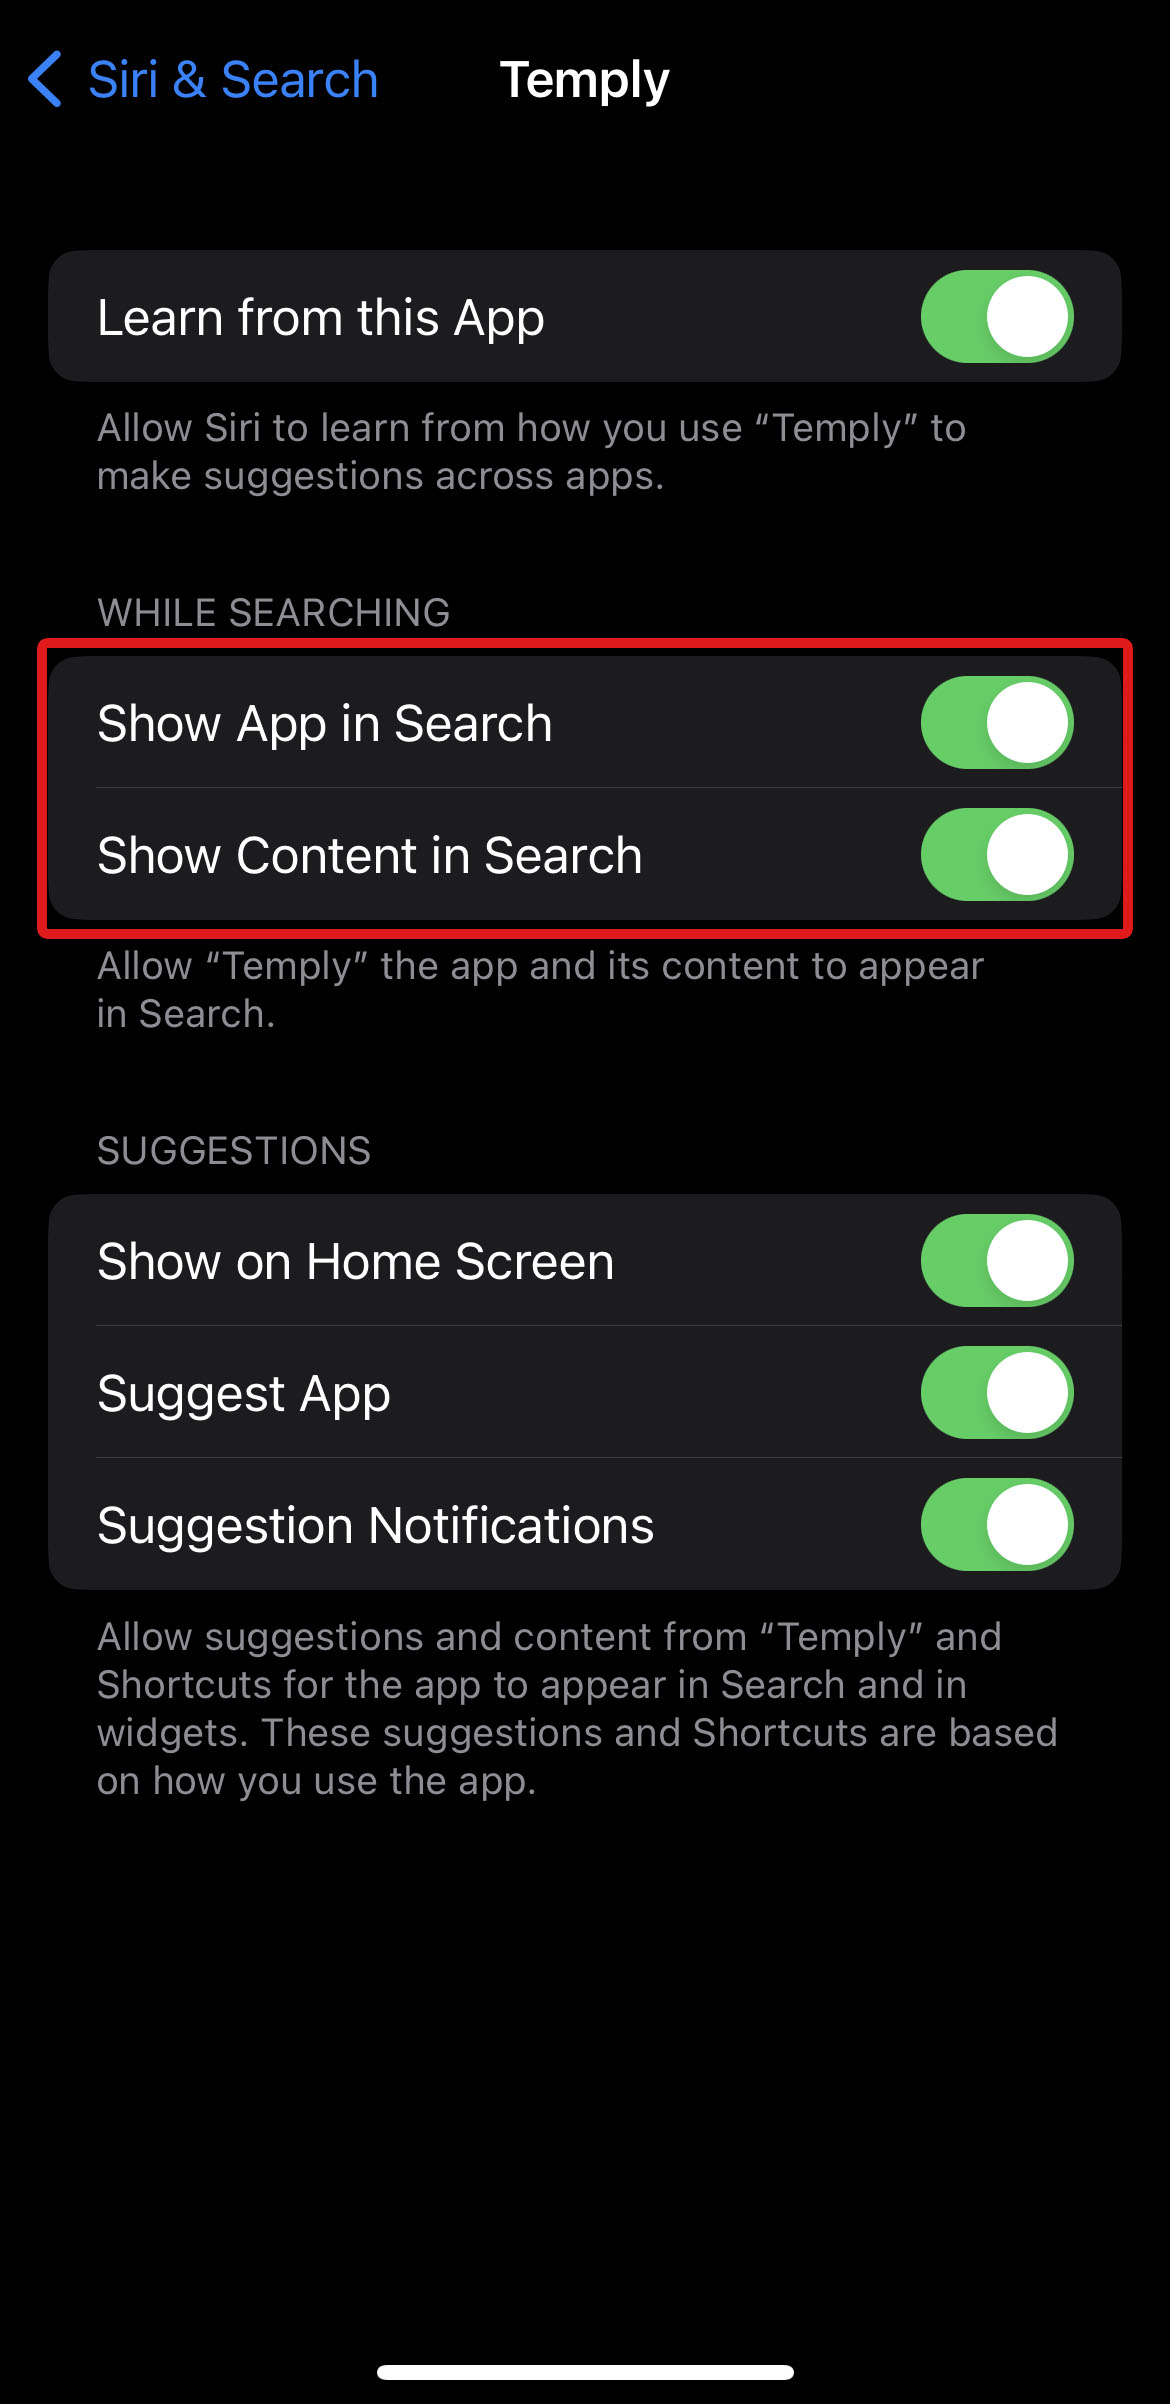 show app in search